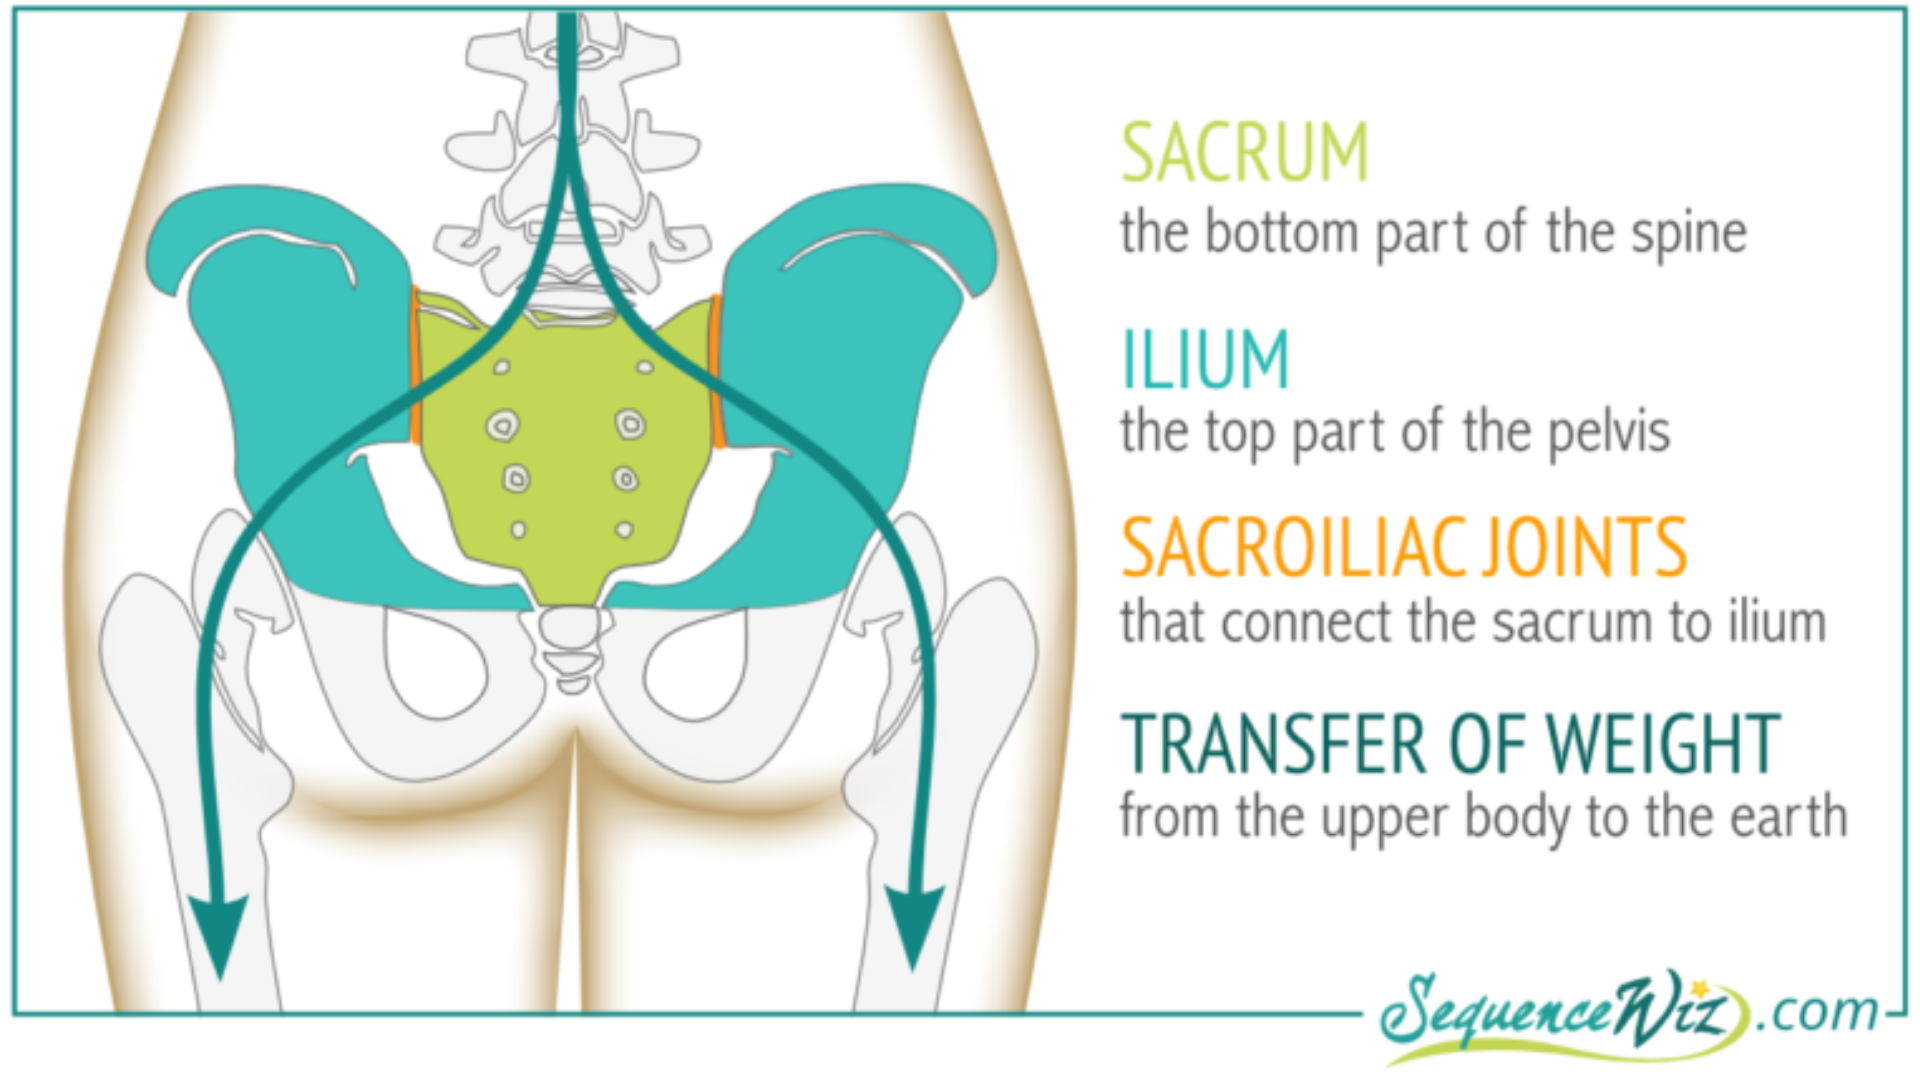 The anatomy image depicts the Sacrum (the lower portion of your spine) fits nicely between the bones of your pelvis connected tvia the sacroiliac joints. This area can be susceptible to lower back pain.